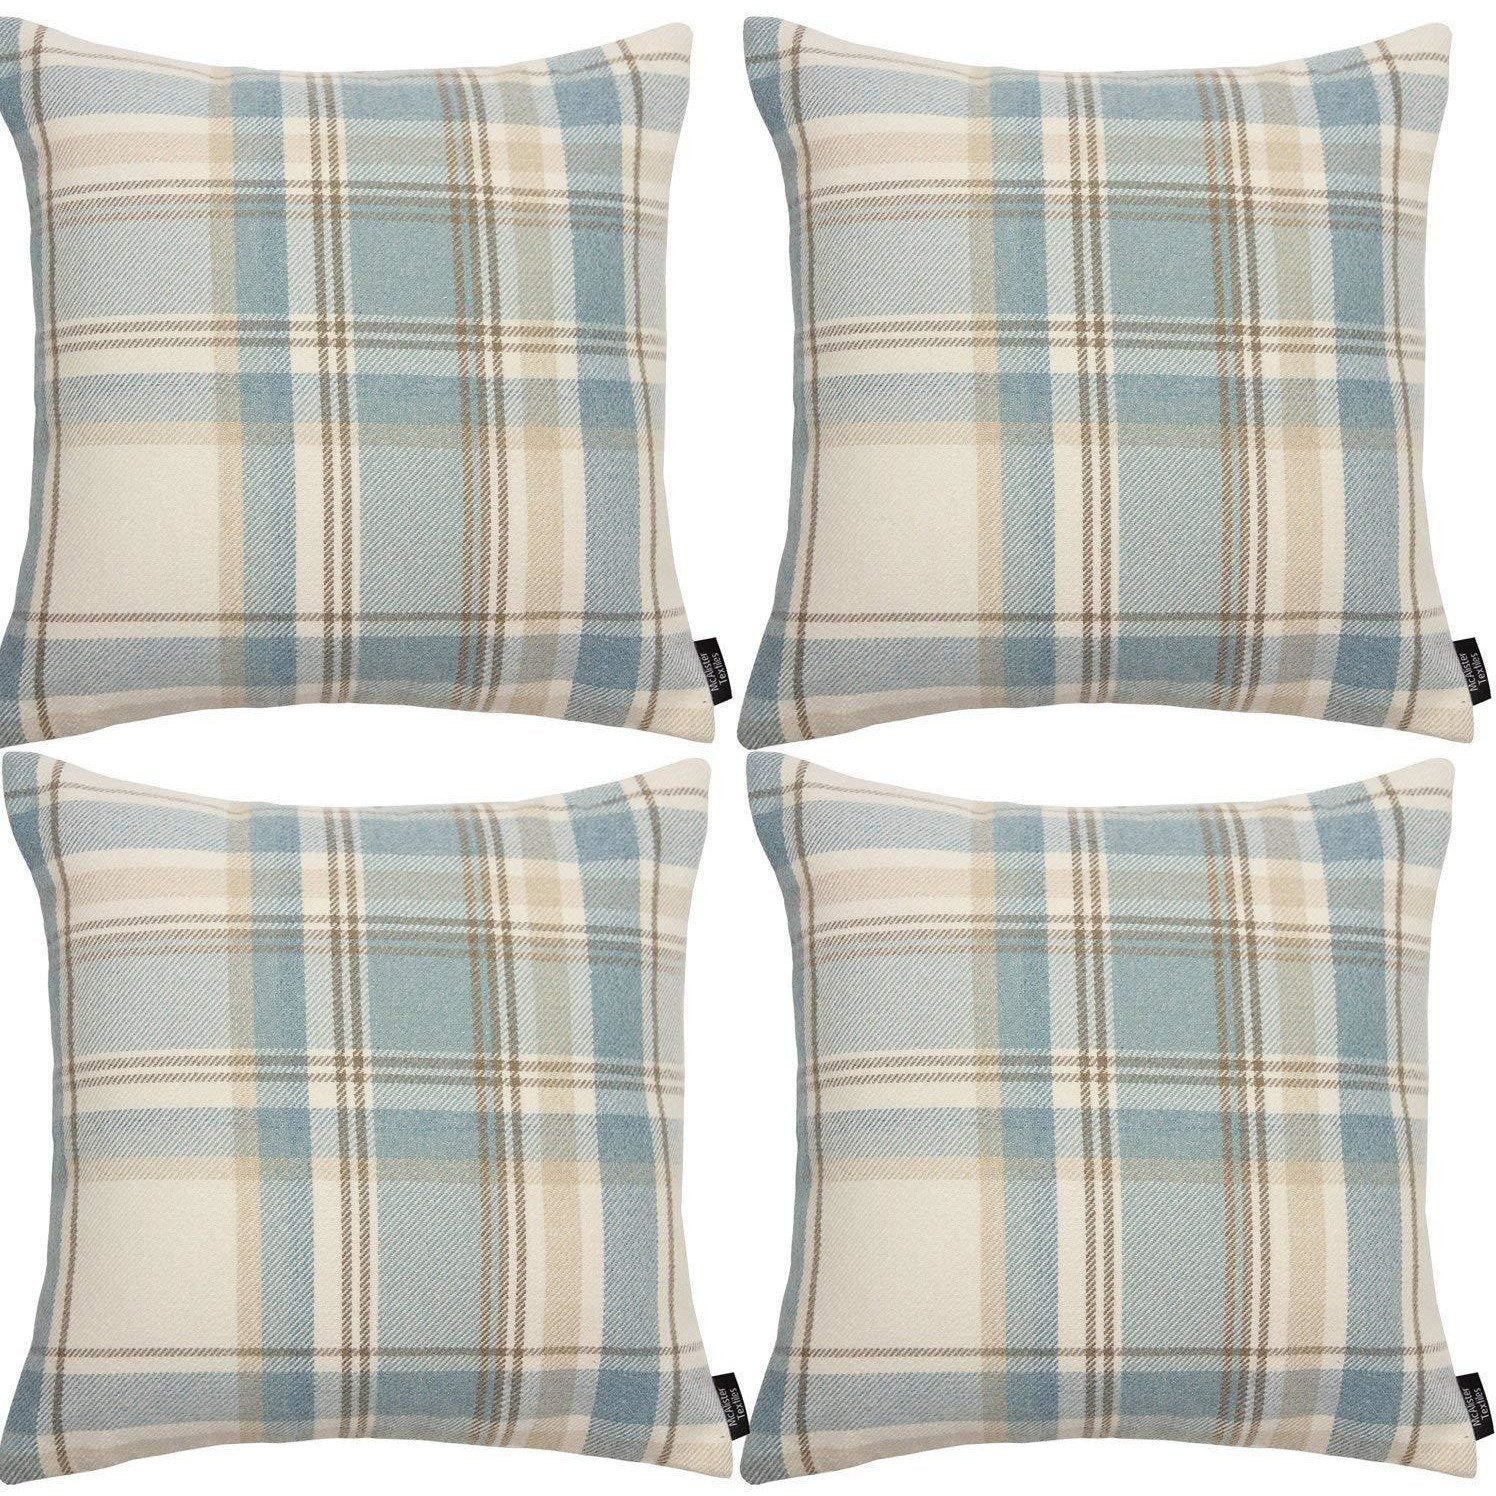 McAlister Textiles Heritage Duck Egg Blue Tartan 43cm x 43cm Cushion Sets Cushions and Covers Cushion Covers Set of 4 